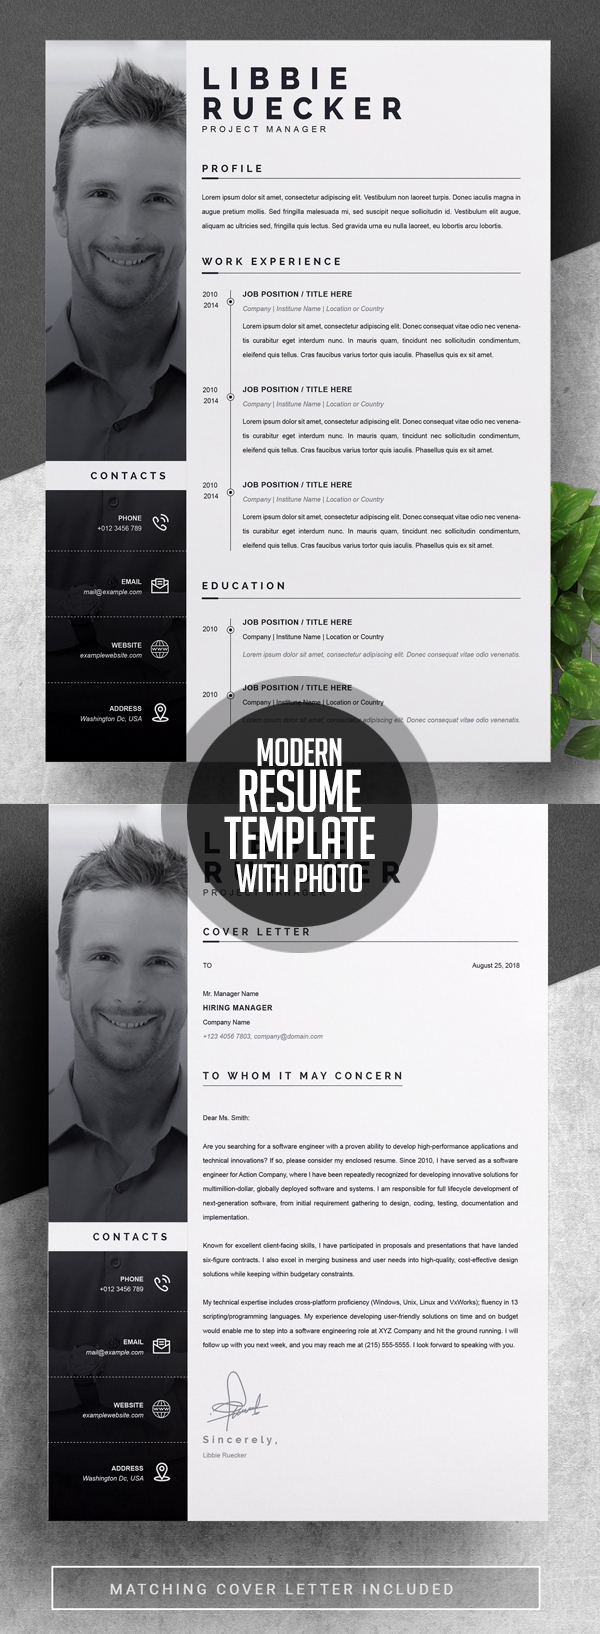 Modern Resume Template with Photo #resumedesign